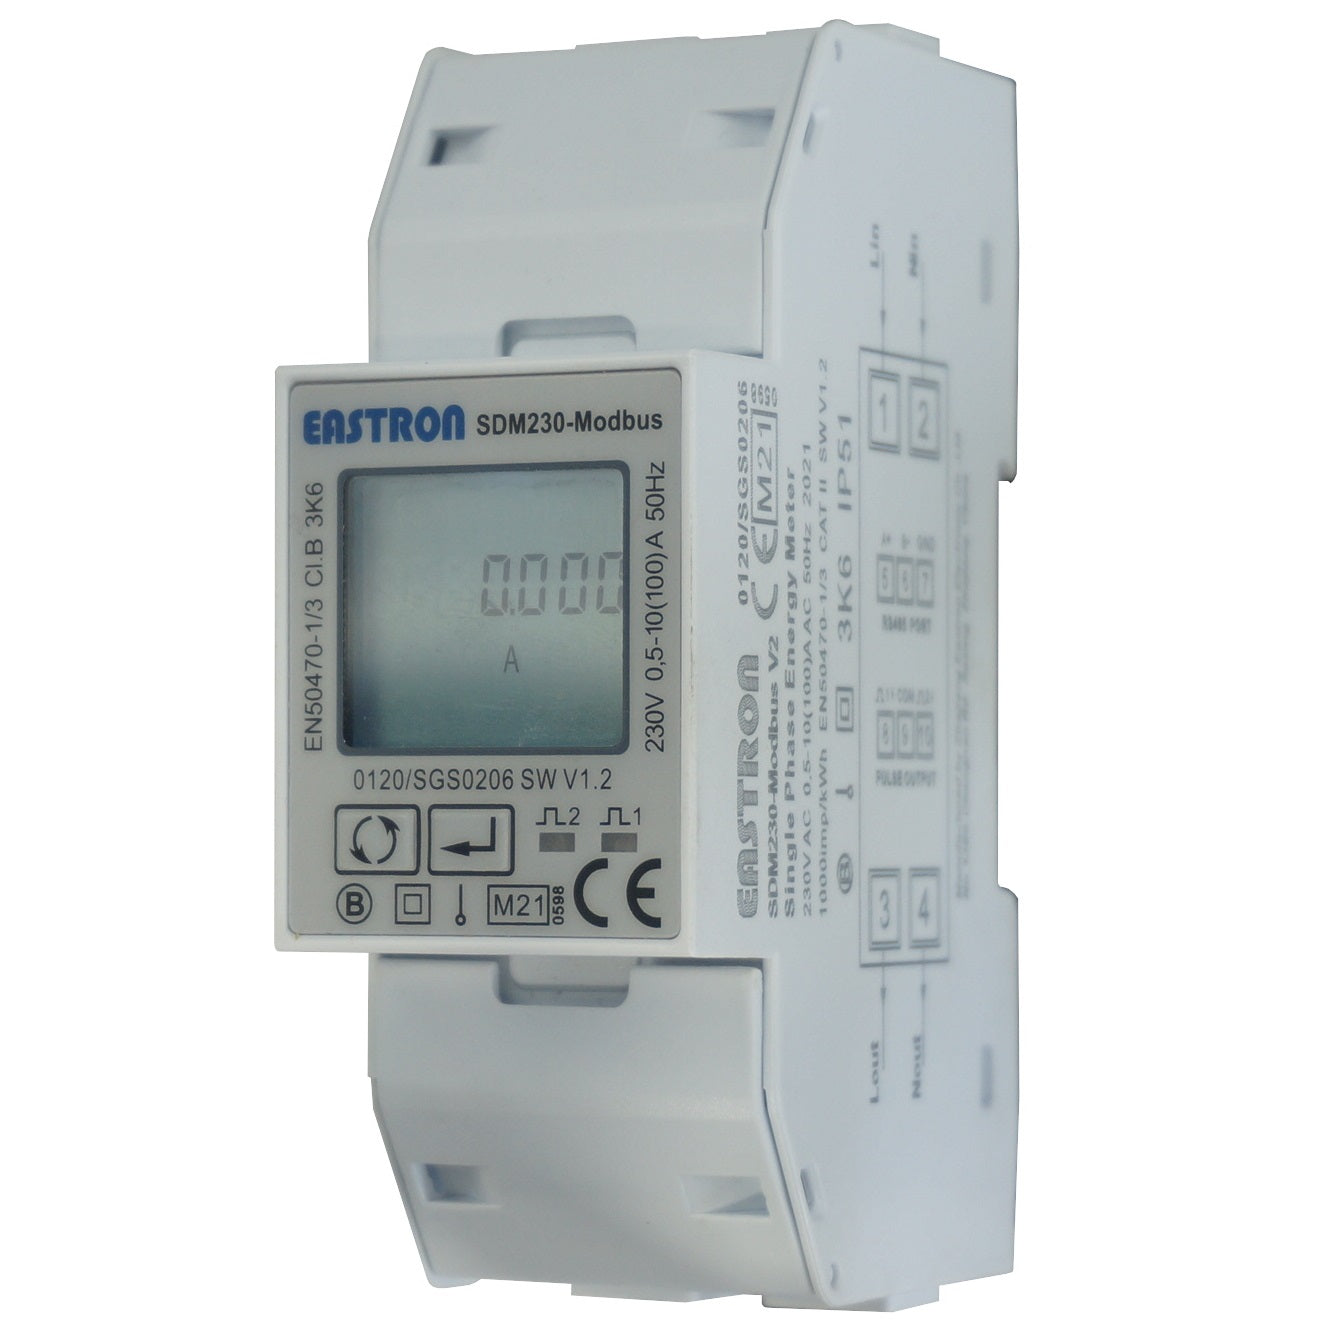 SDM230Modbus-MID-V2 (SLX), DIN Rail Mount kWh Meter, Single Phase, 240VAC aux, Class 1, 100Amp Direct Connect, w/ 2 x pulse outputs and RS485 Modbus RTU Comms, MID Approved